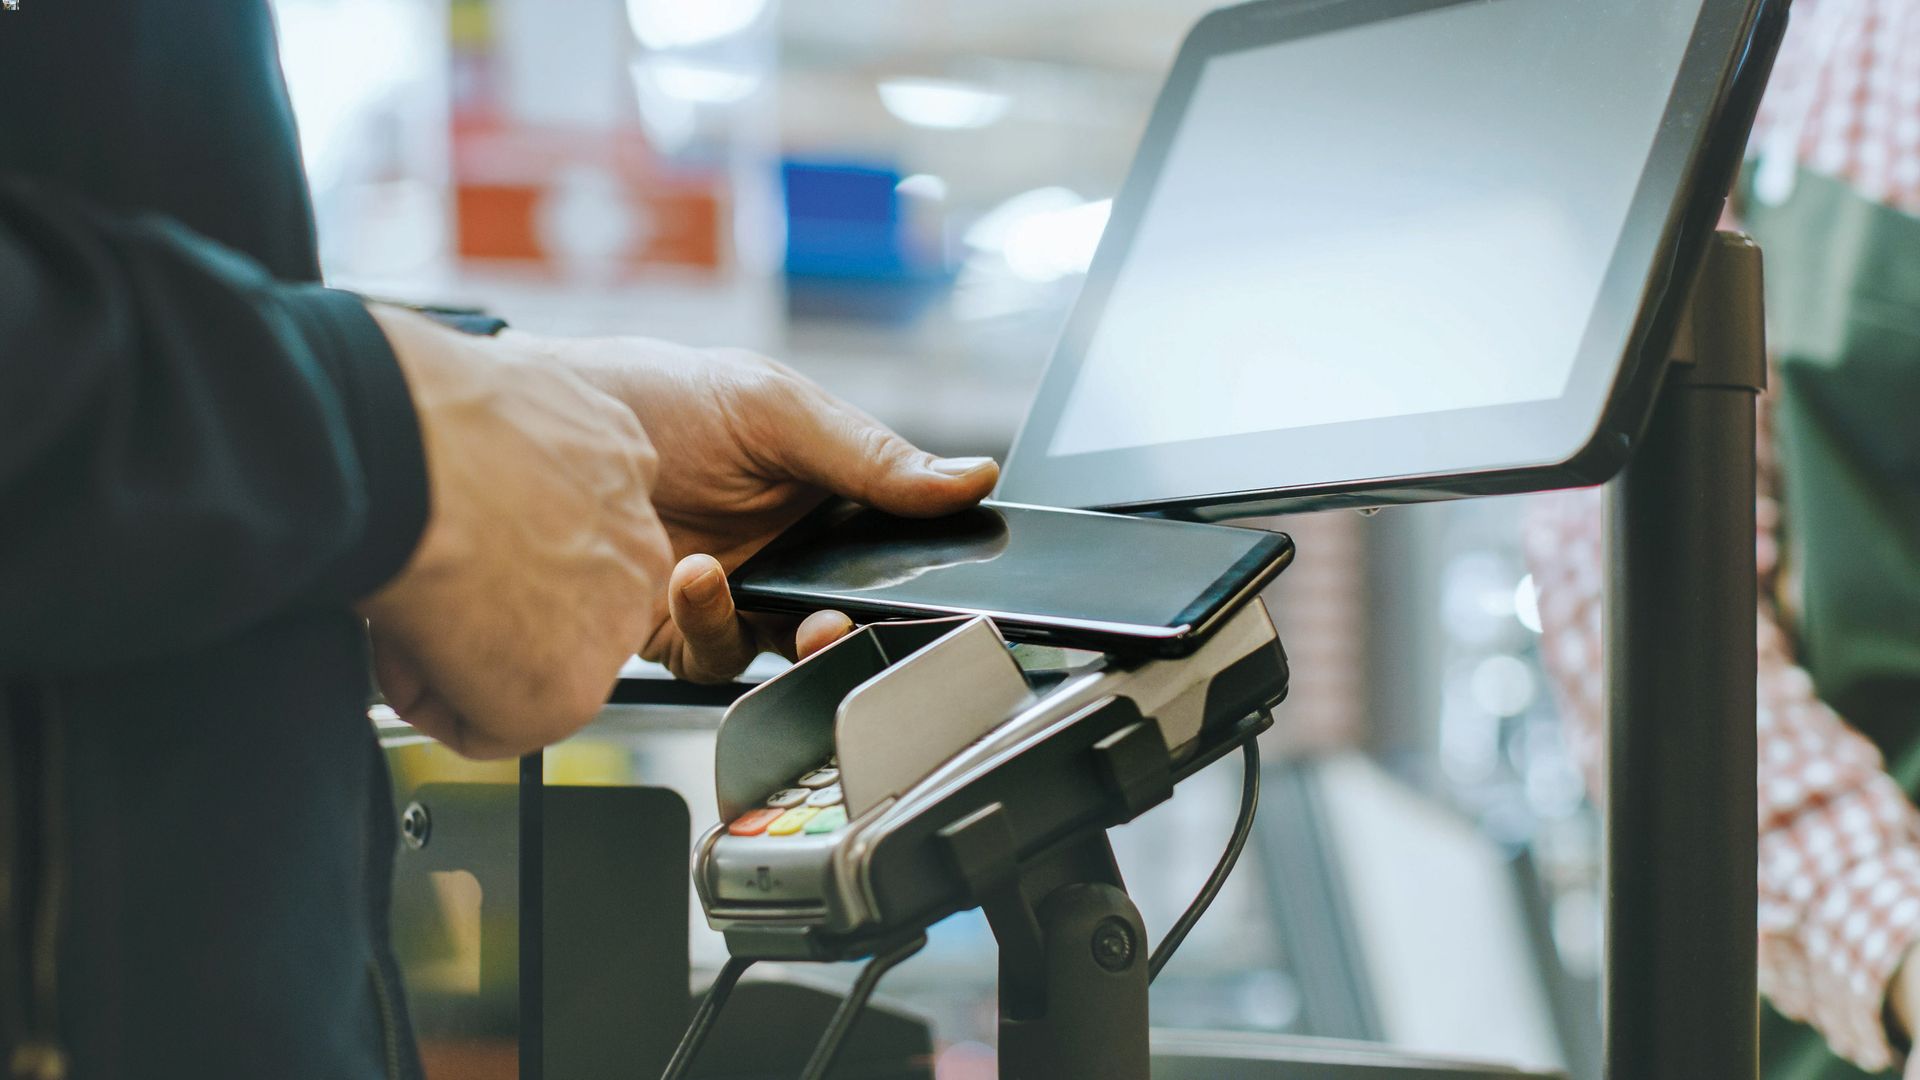 cvs-now-has-a-mobile-contactless-payment-solution